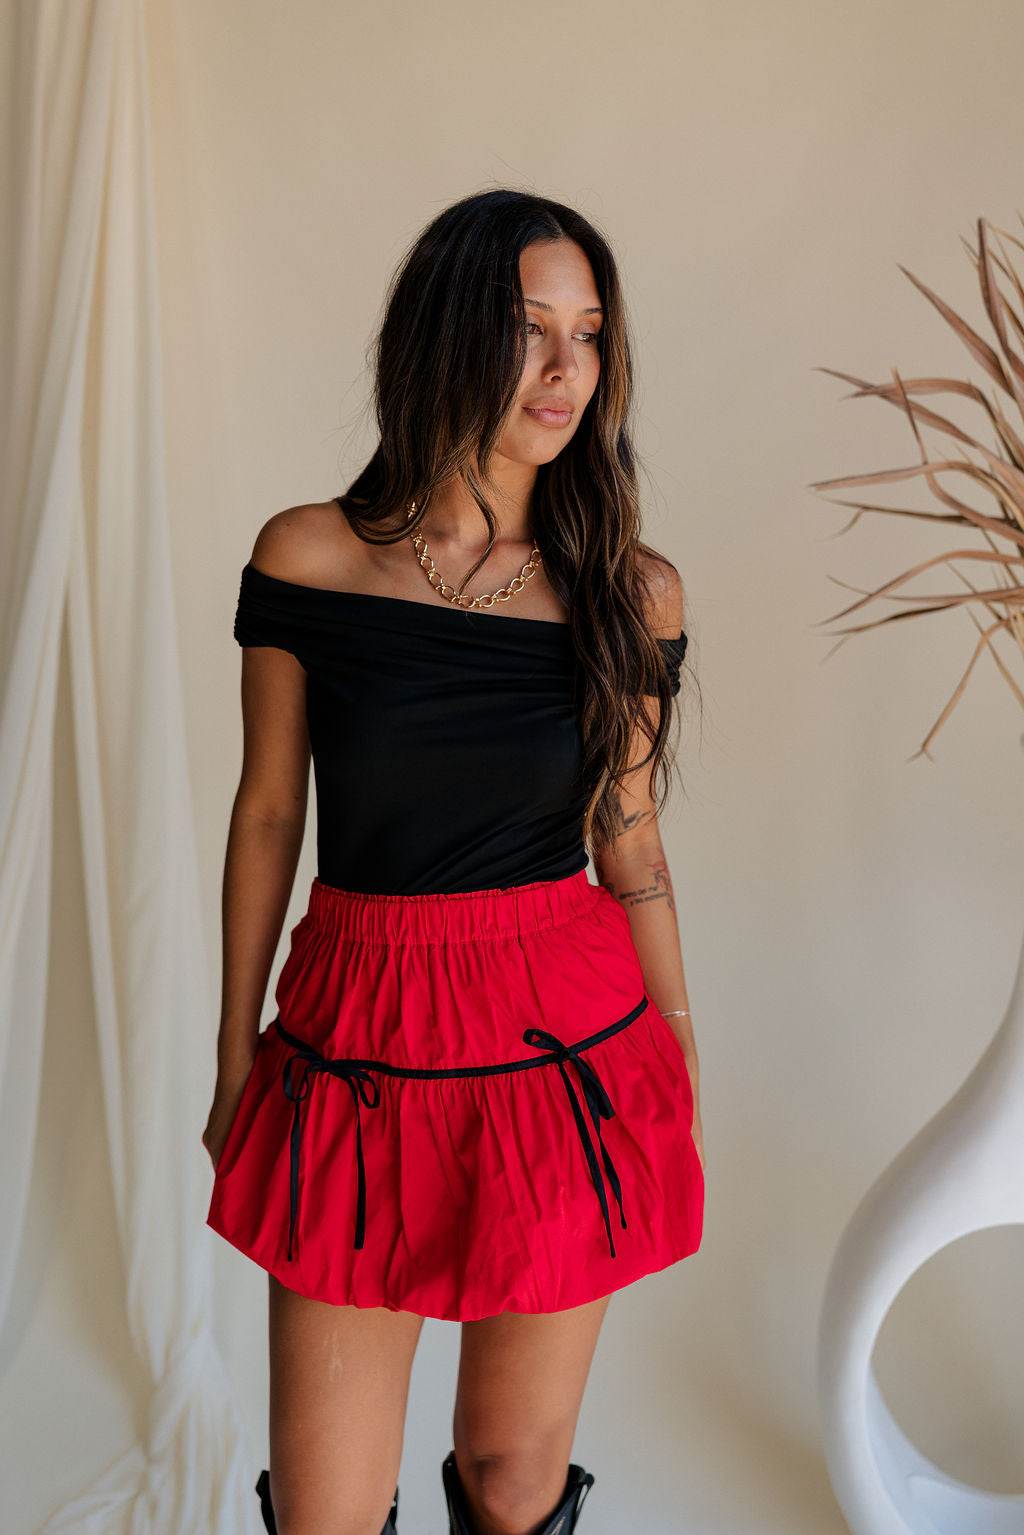 Upper body front view of female model wearing the Nina Bow Detail Mini Skirt in Red that has red fabric, black bows in the middle, and an elastic waist. Worn with black top and black boots.